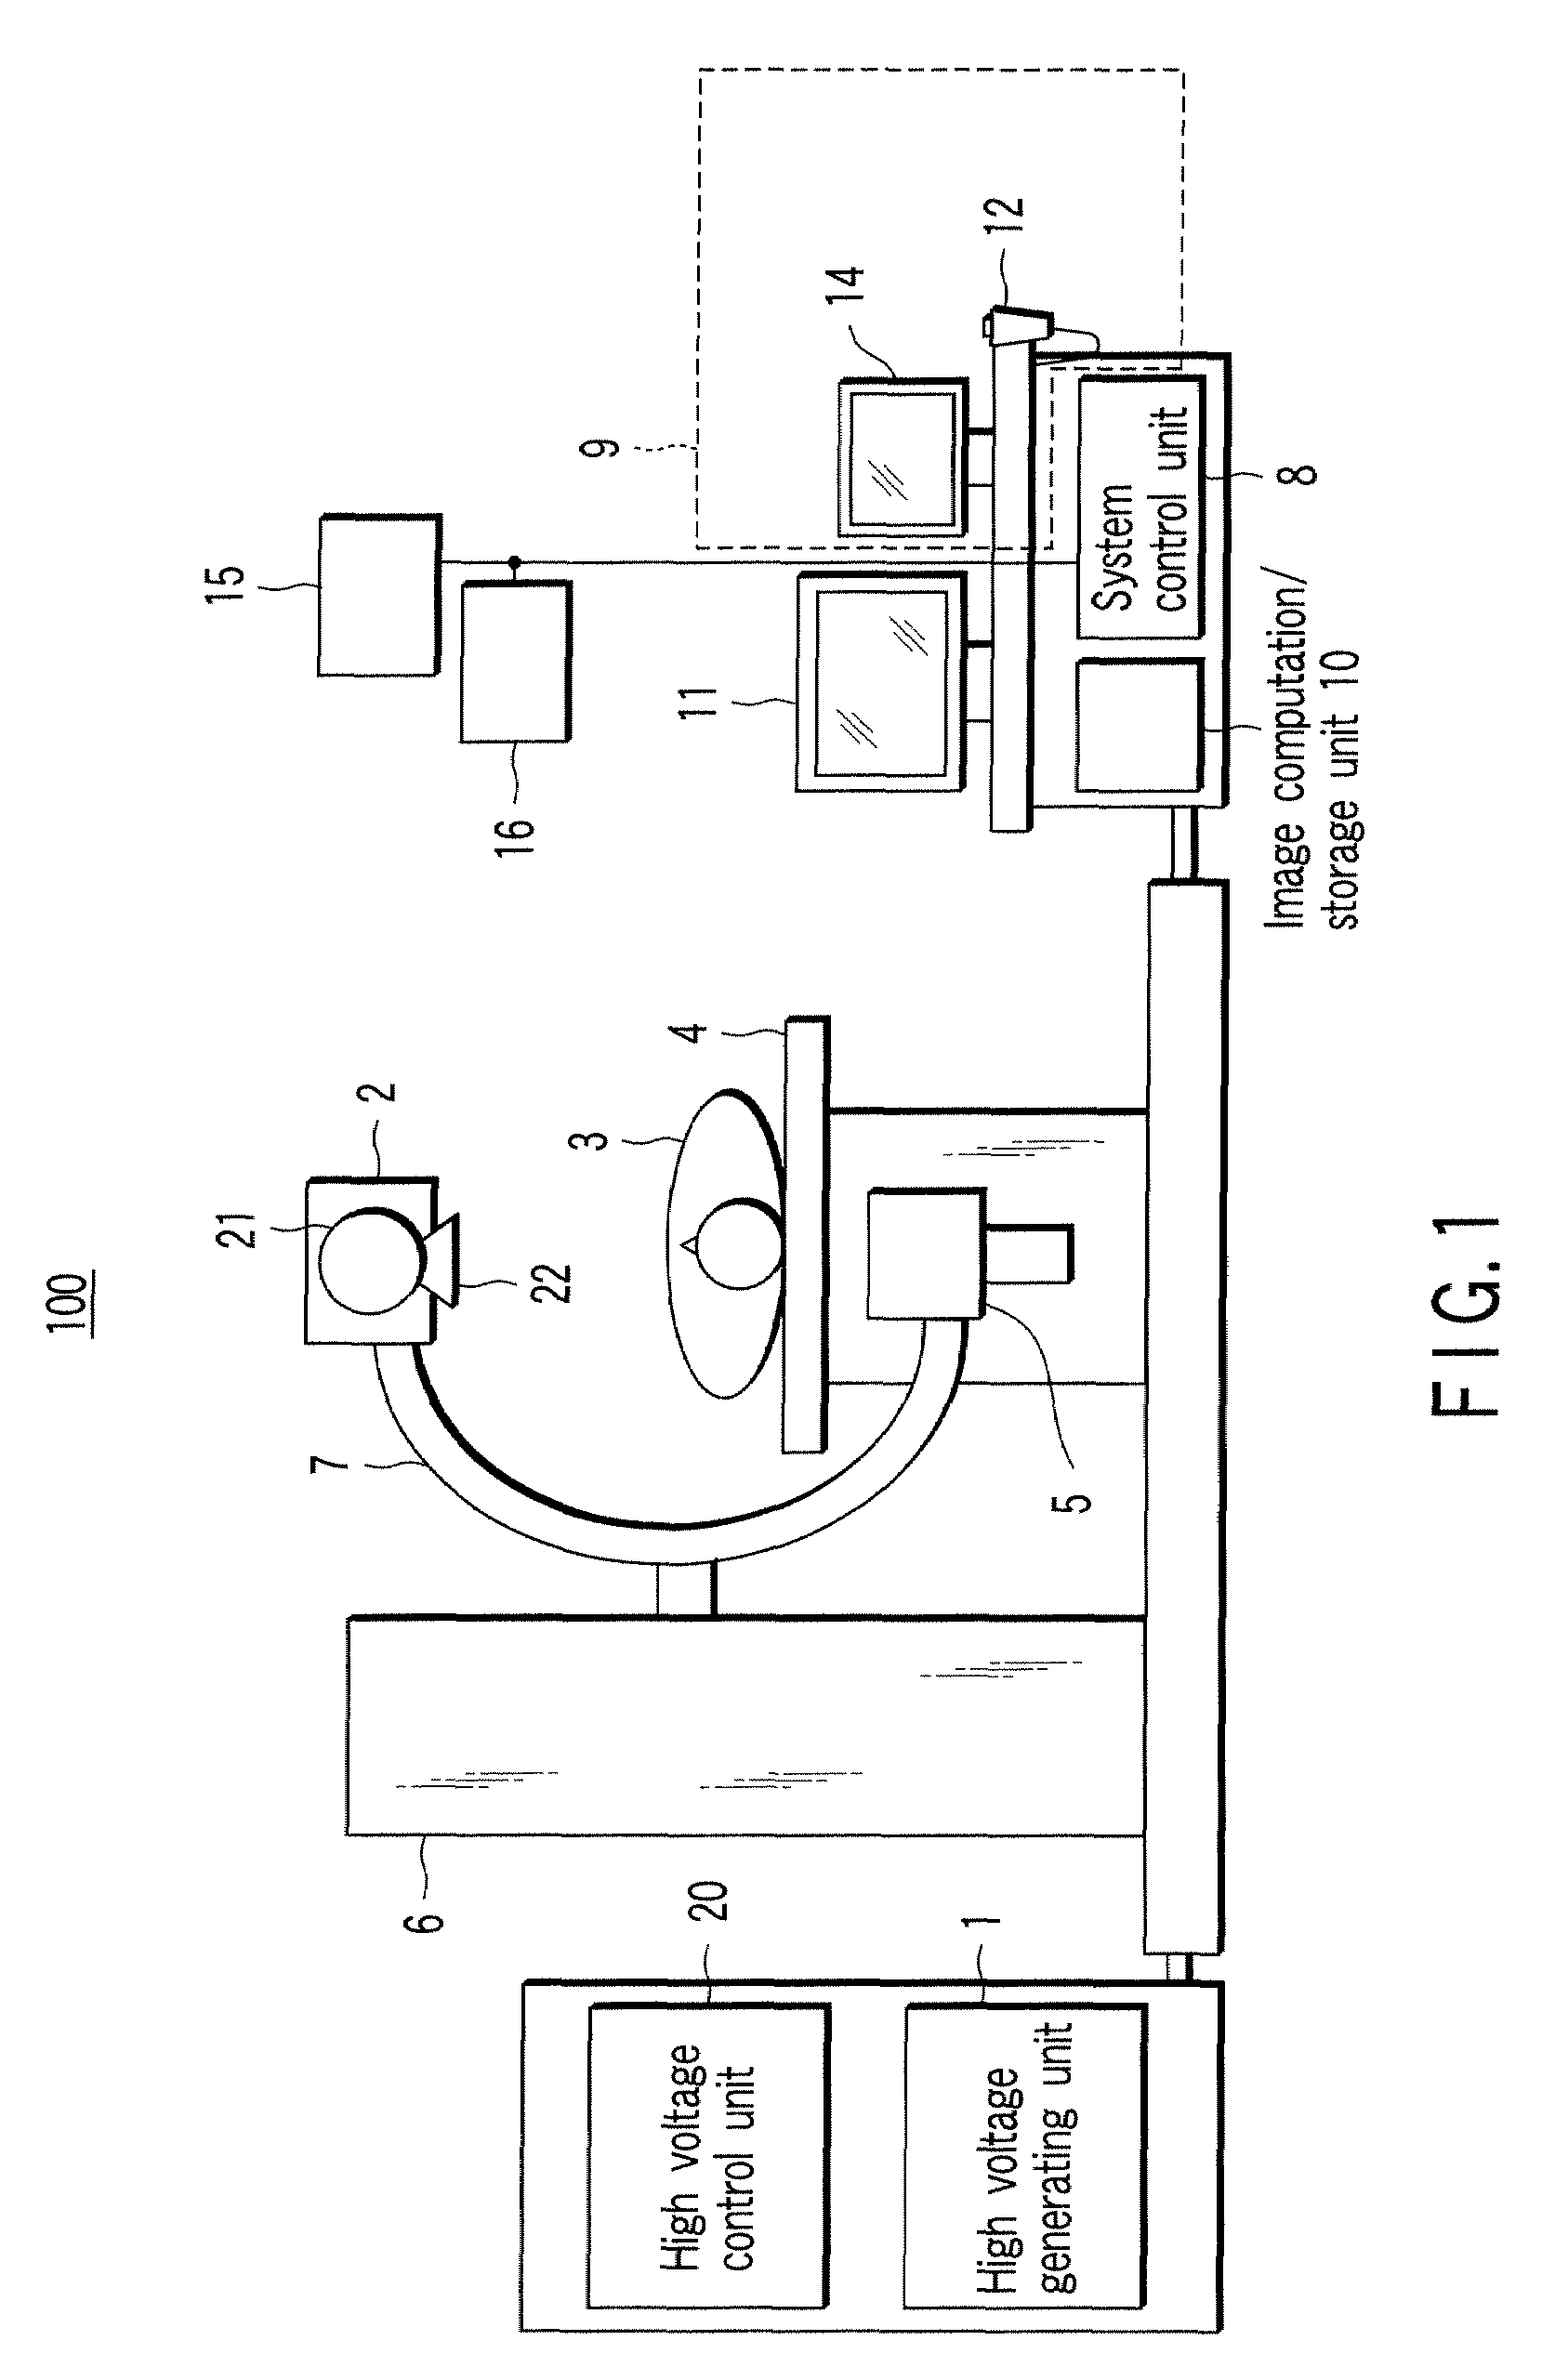 X-ray diagnostic apparatus and image processing apparatus